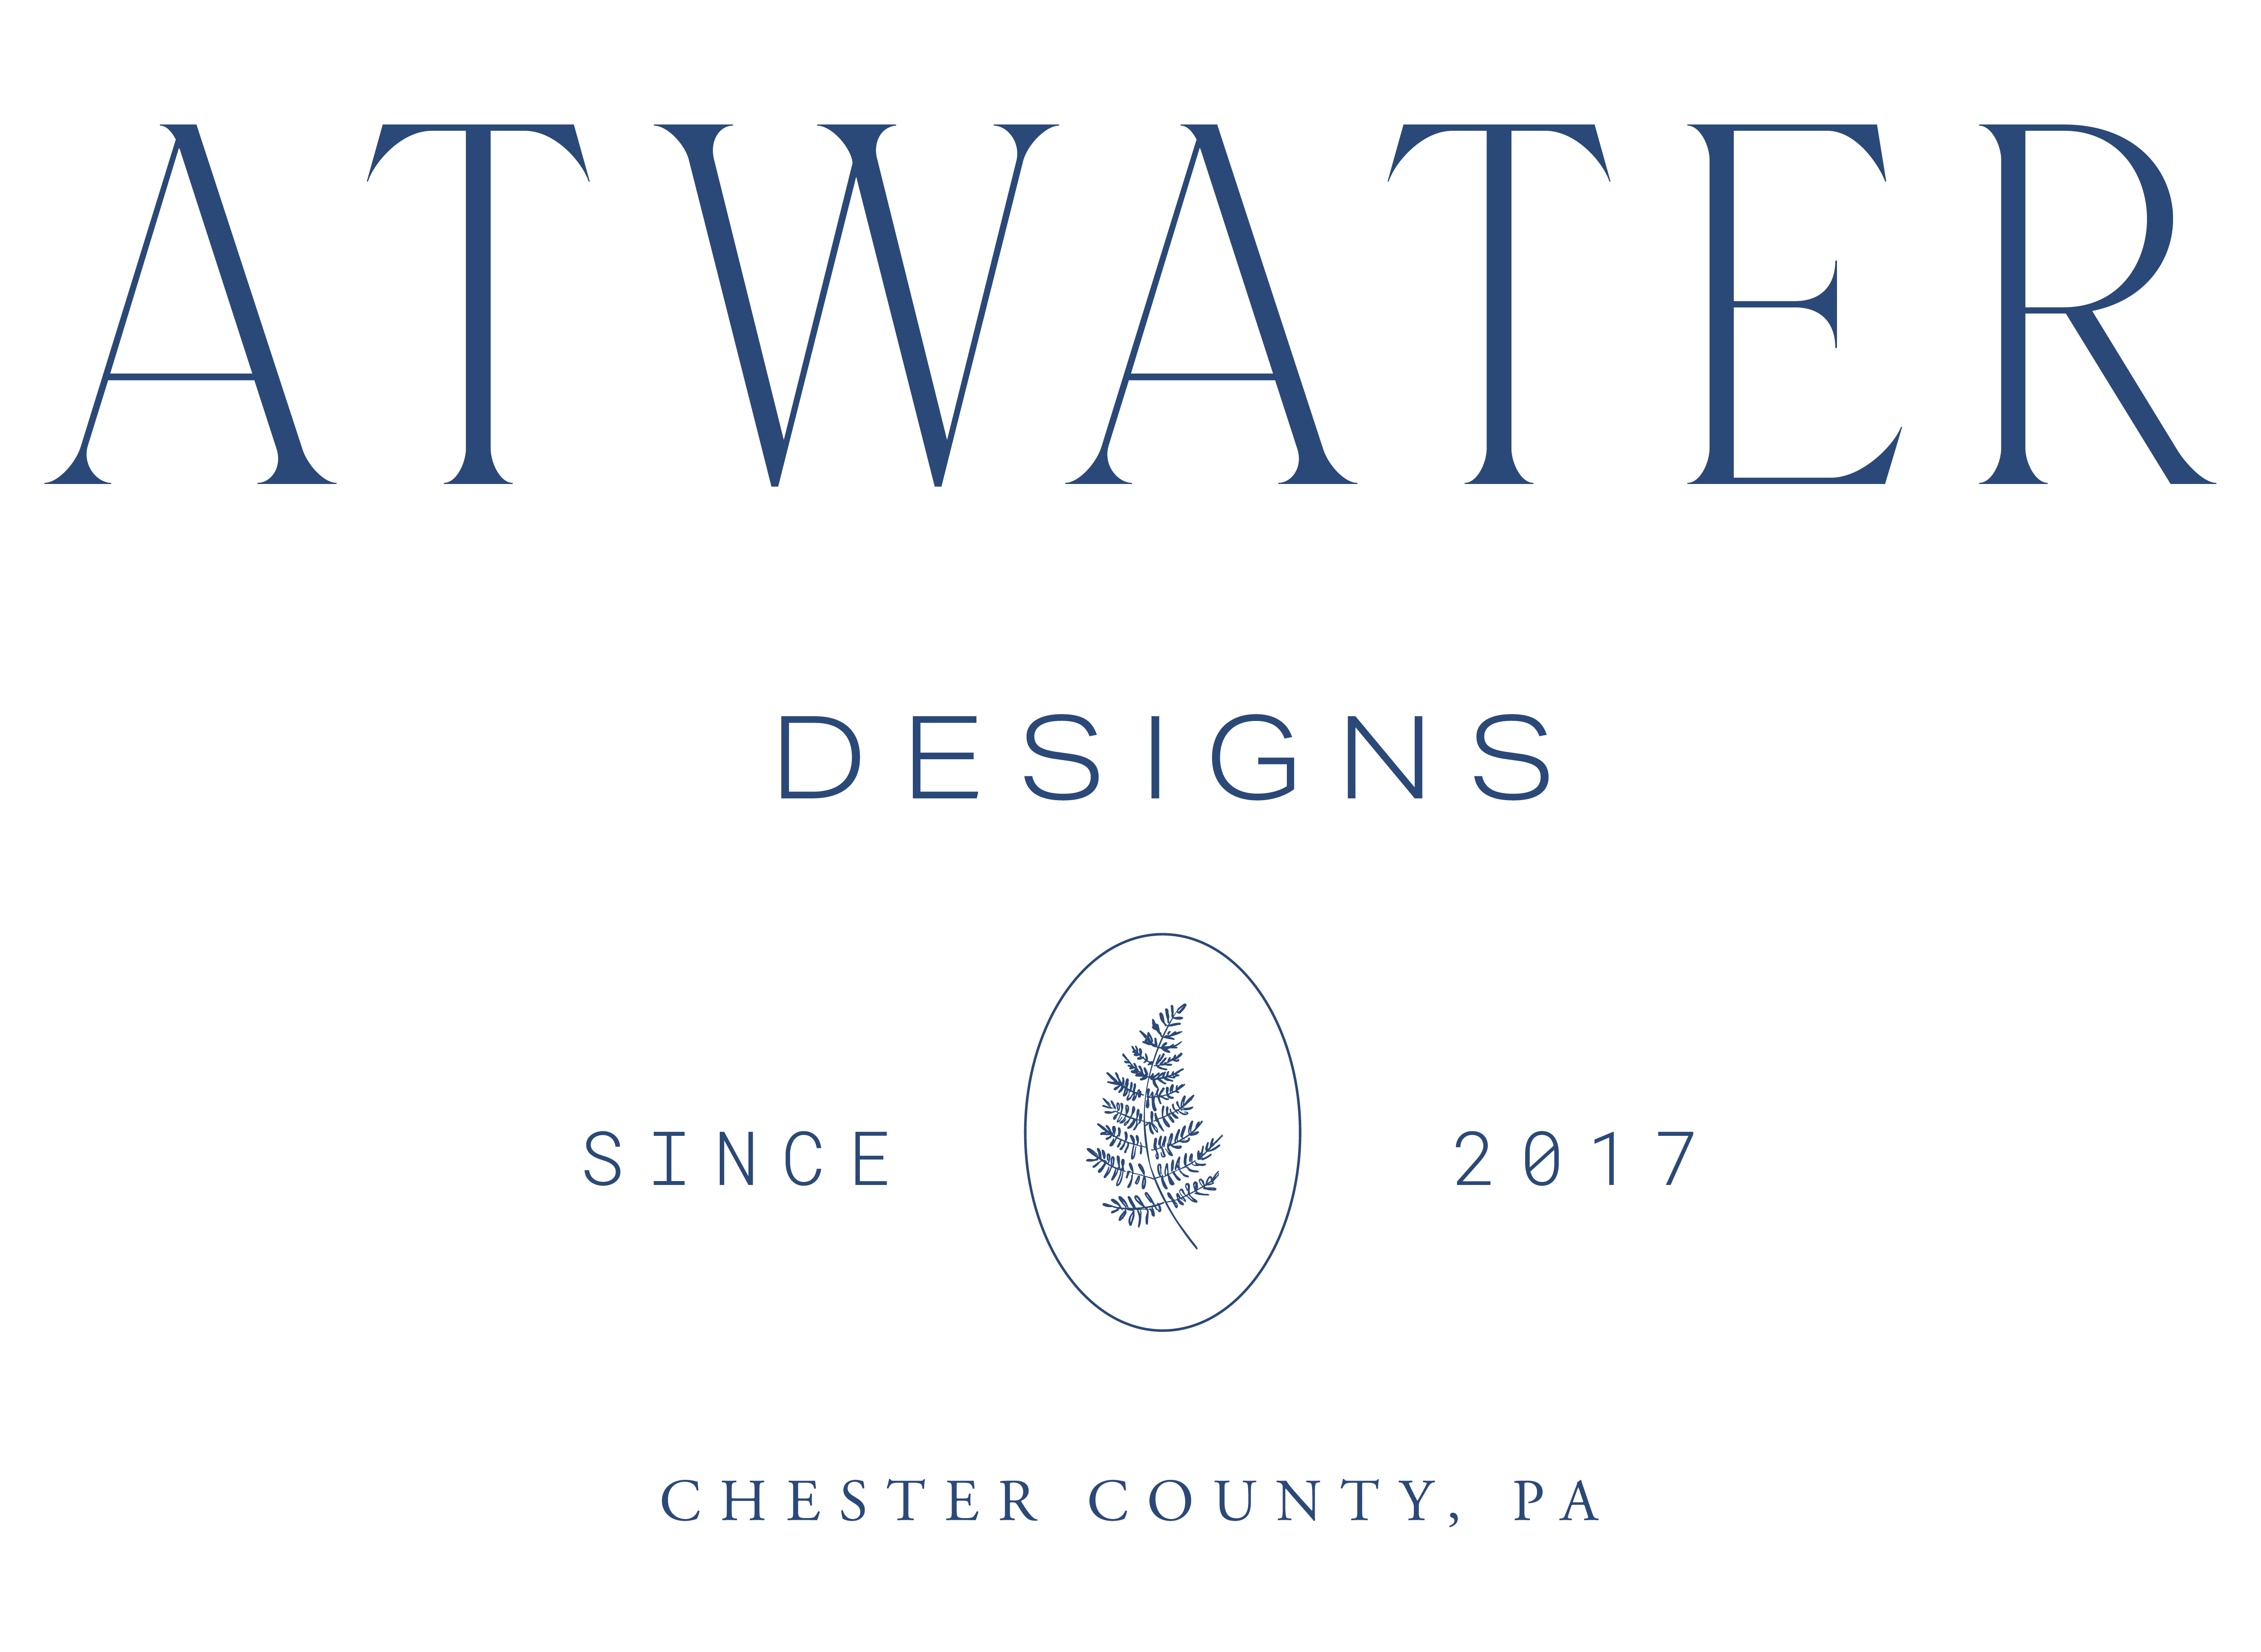 Atwater Designs